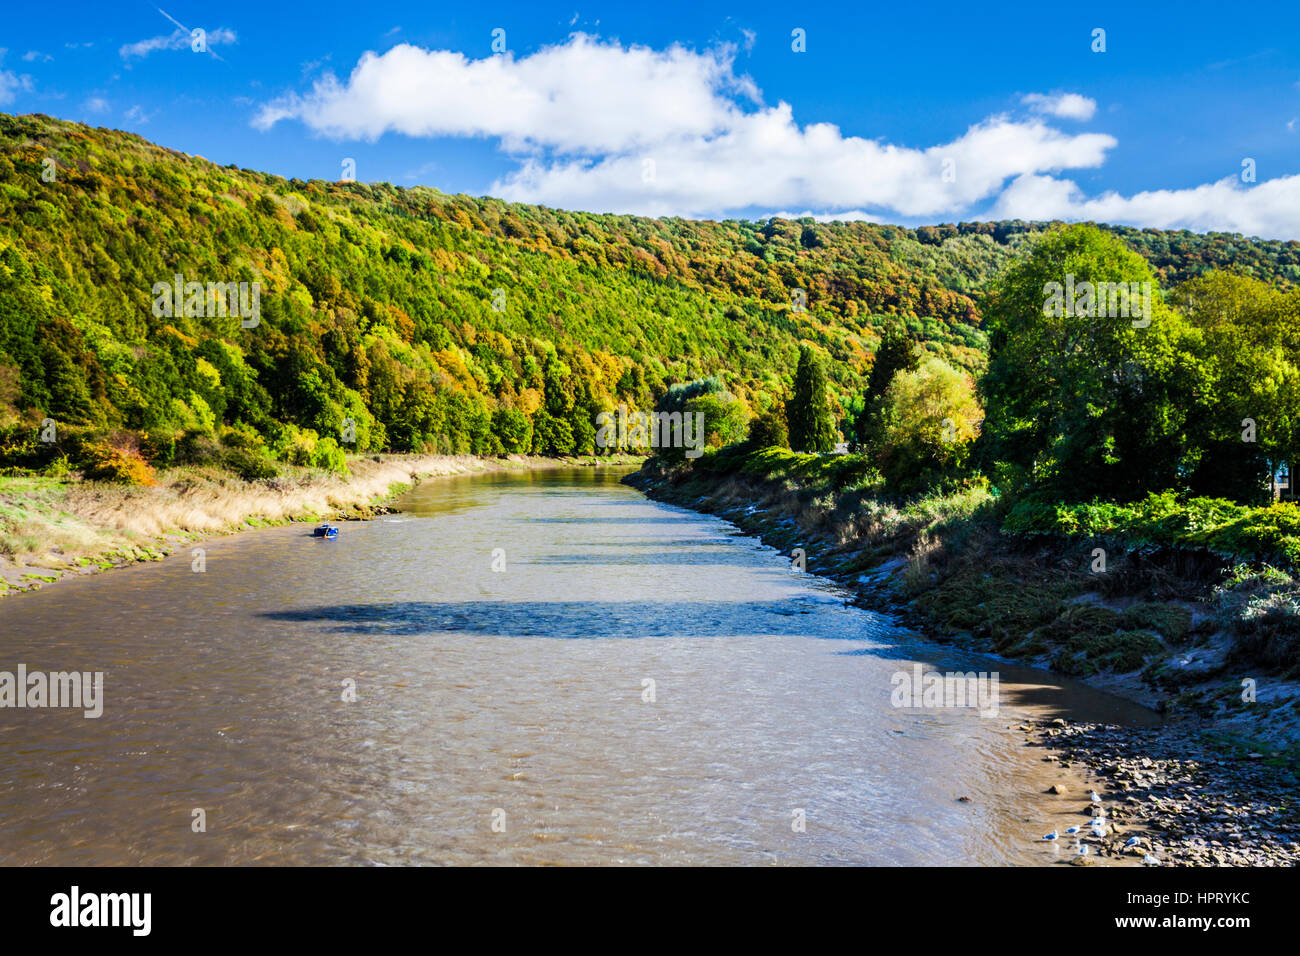 Il fiume Wye nearTintern in Monmouthshire, Galles. Foto Stock